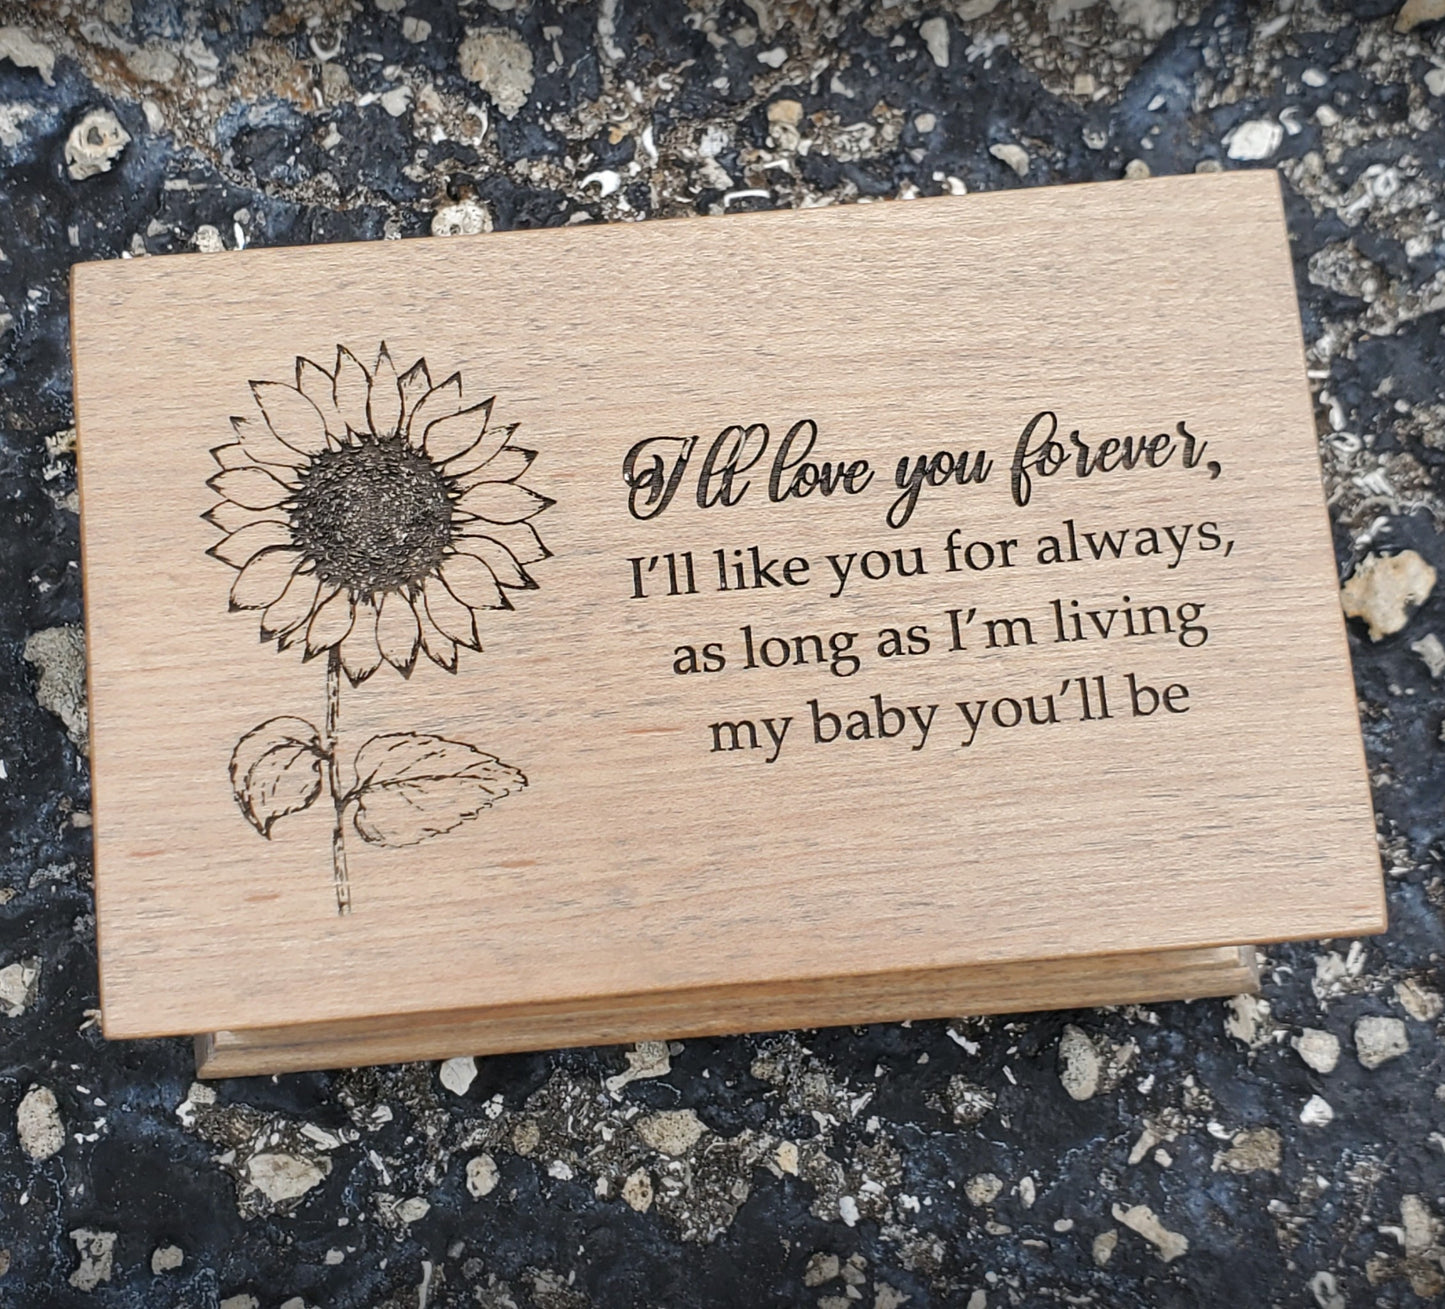 I'll love you forever engraved music jewelry box along with a sunflower image